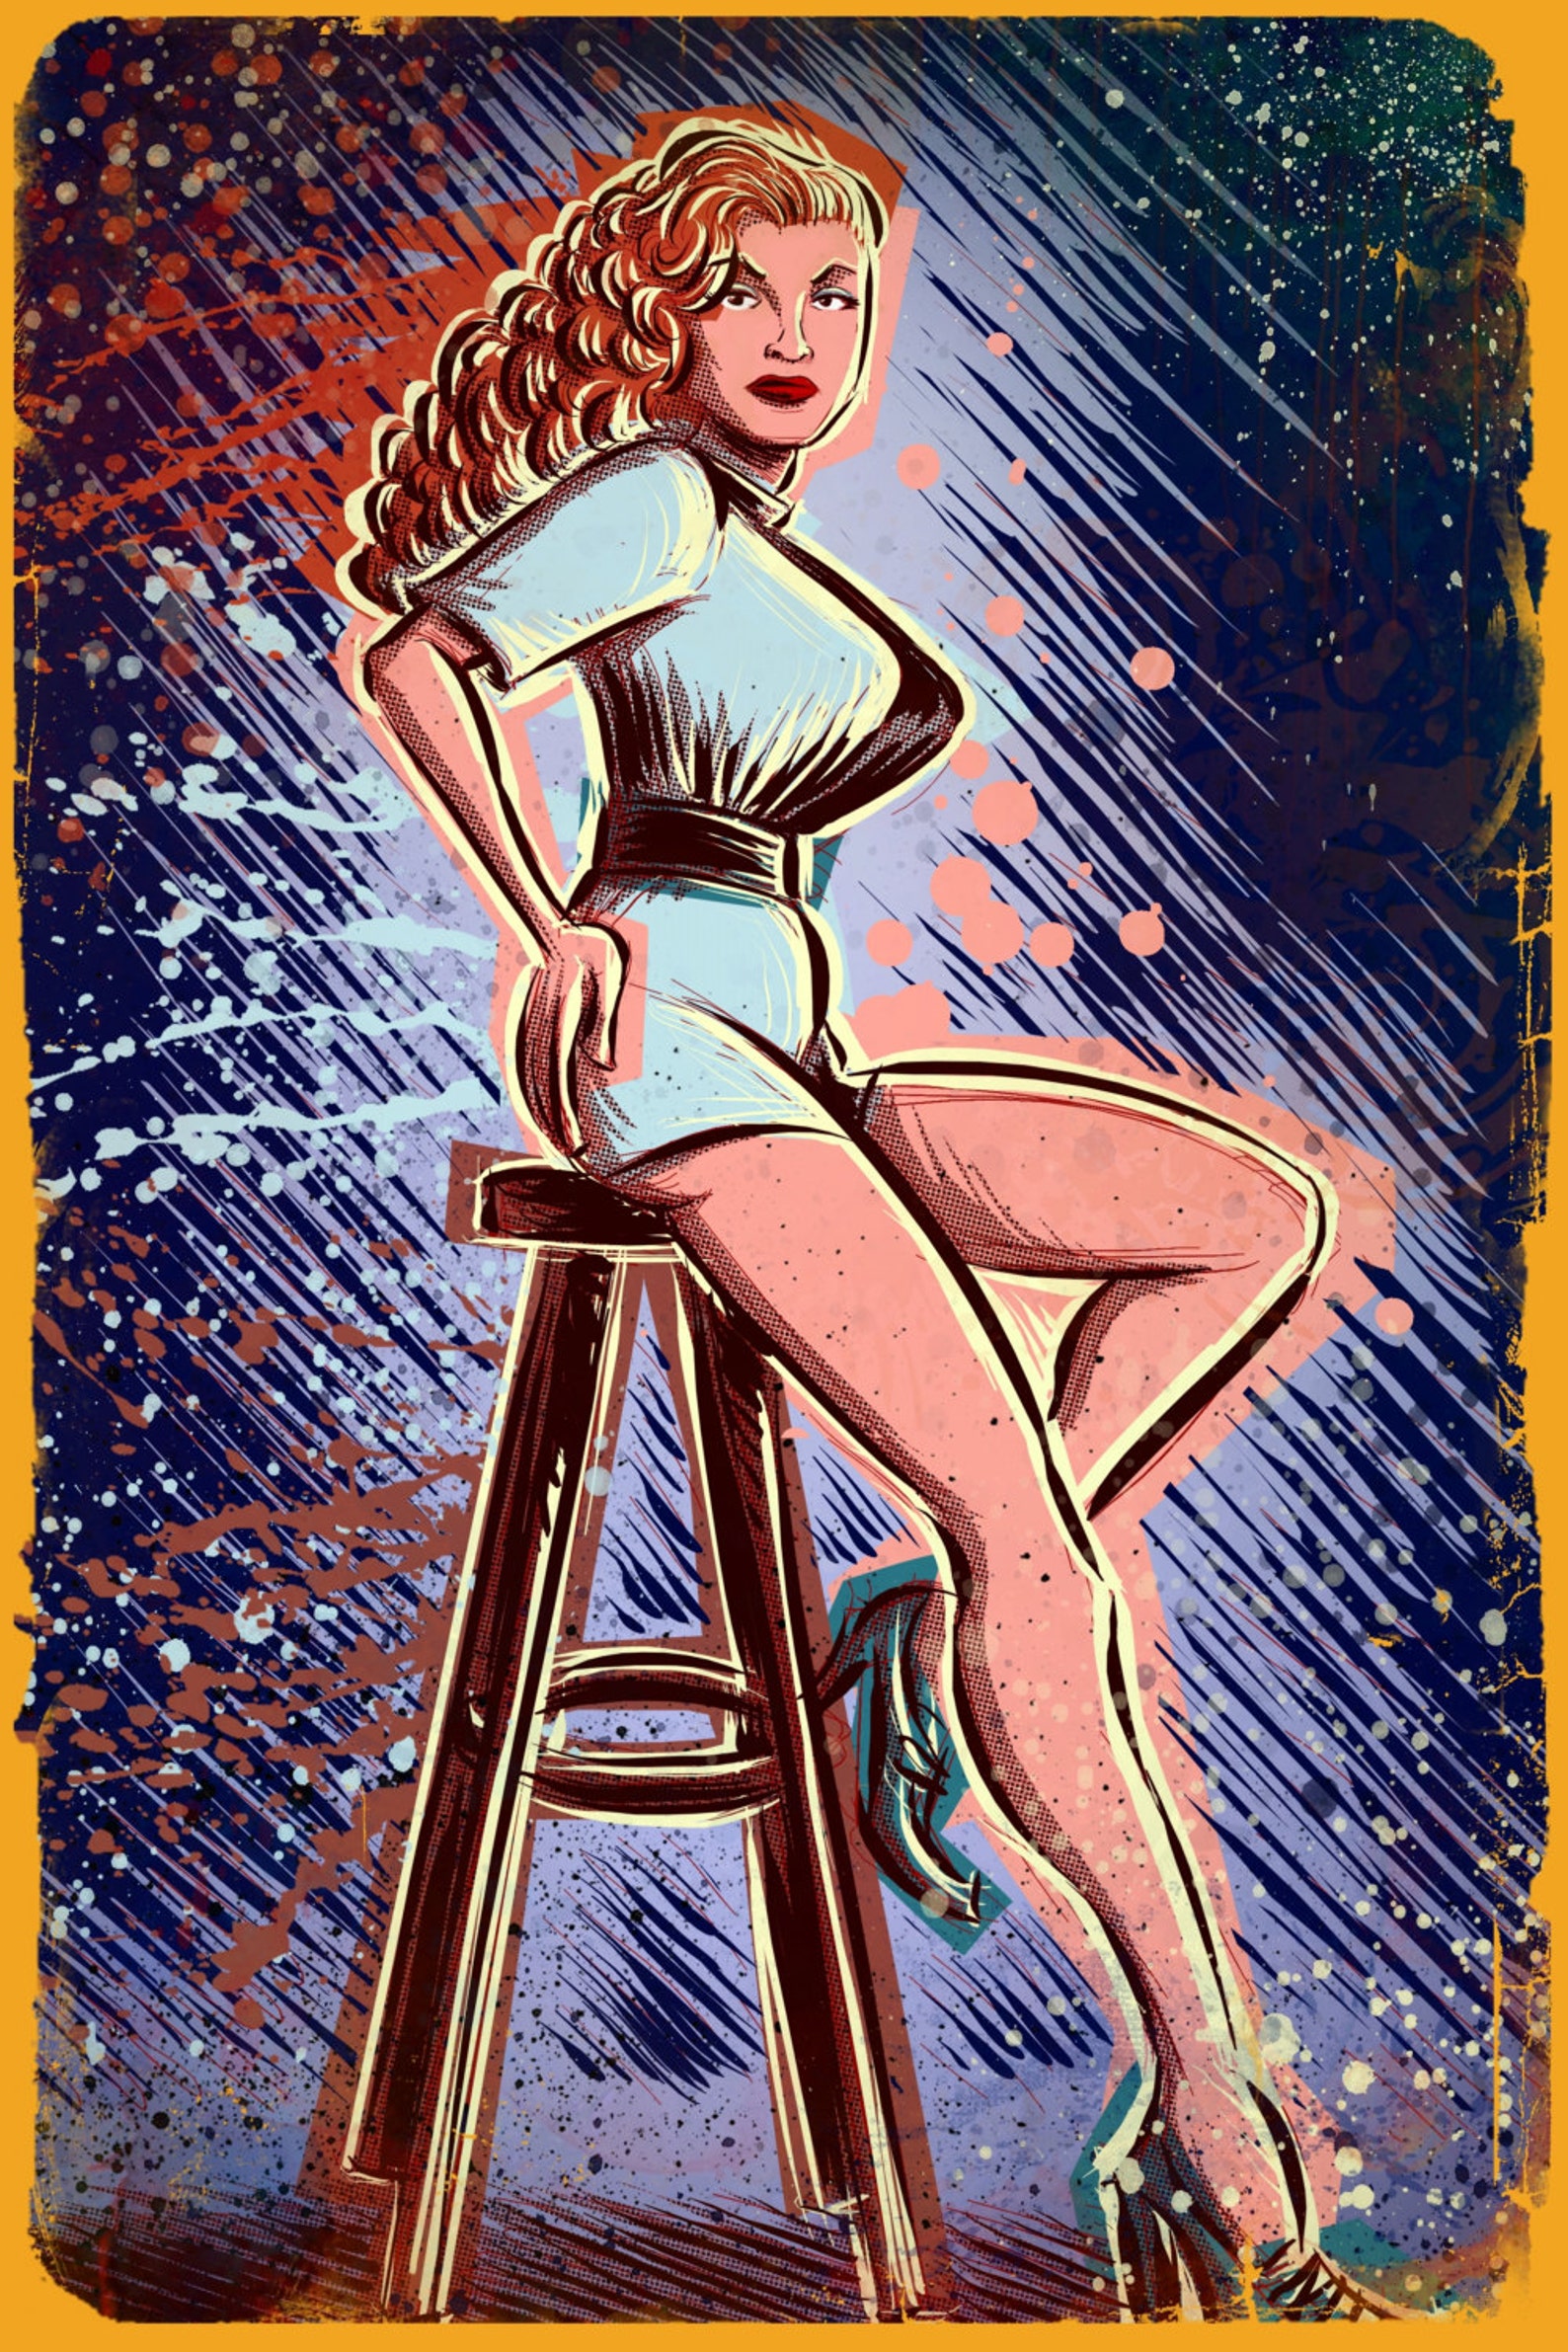 Tempest Storm Art Print Burlesque Pin Up Female Red Head Etsy